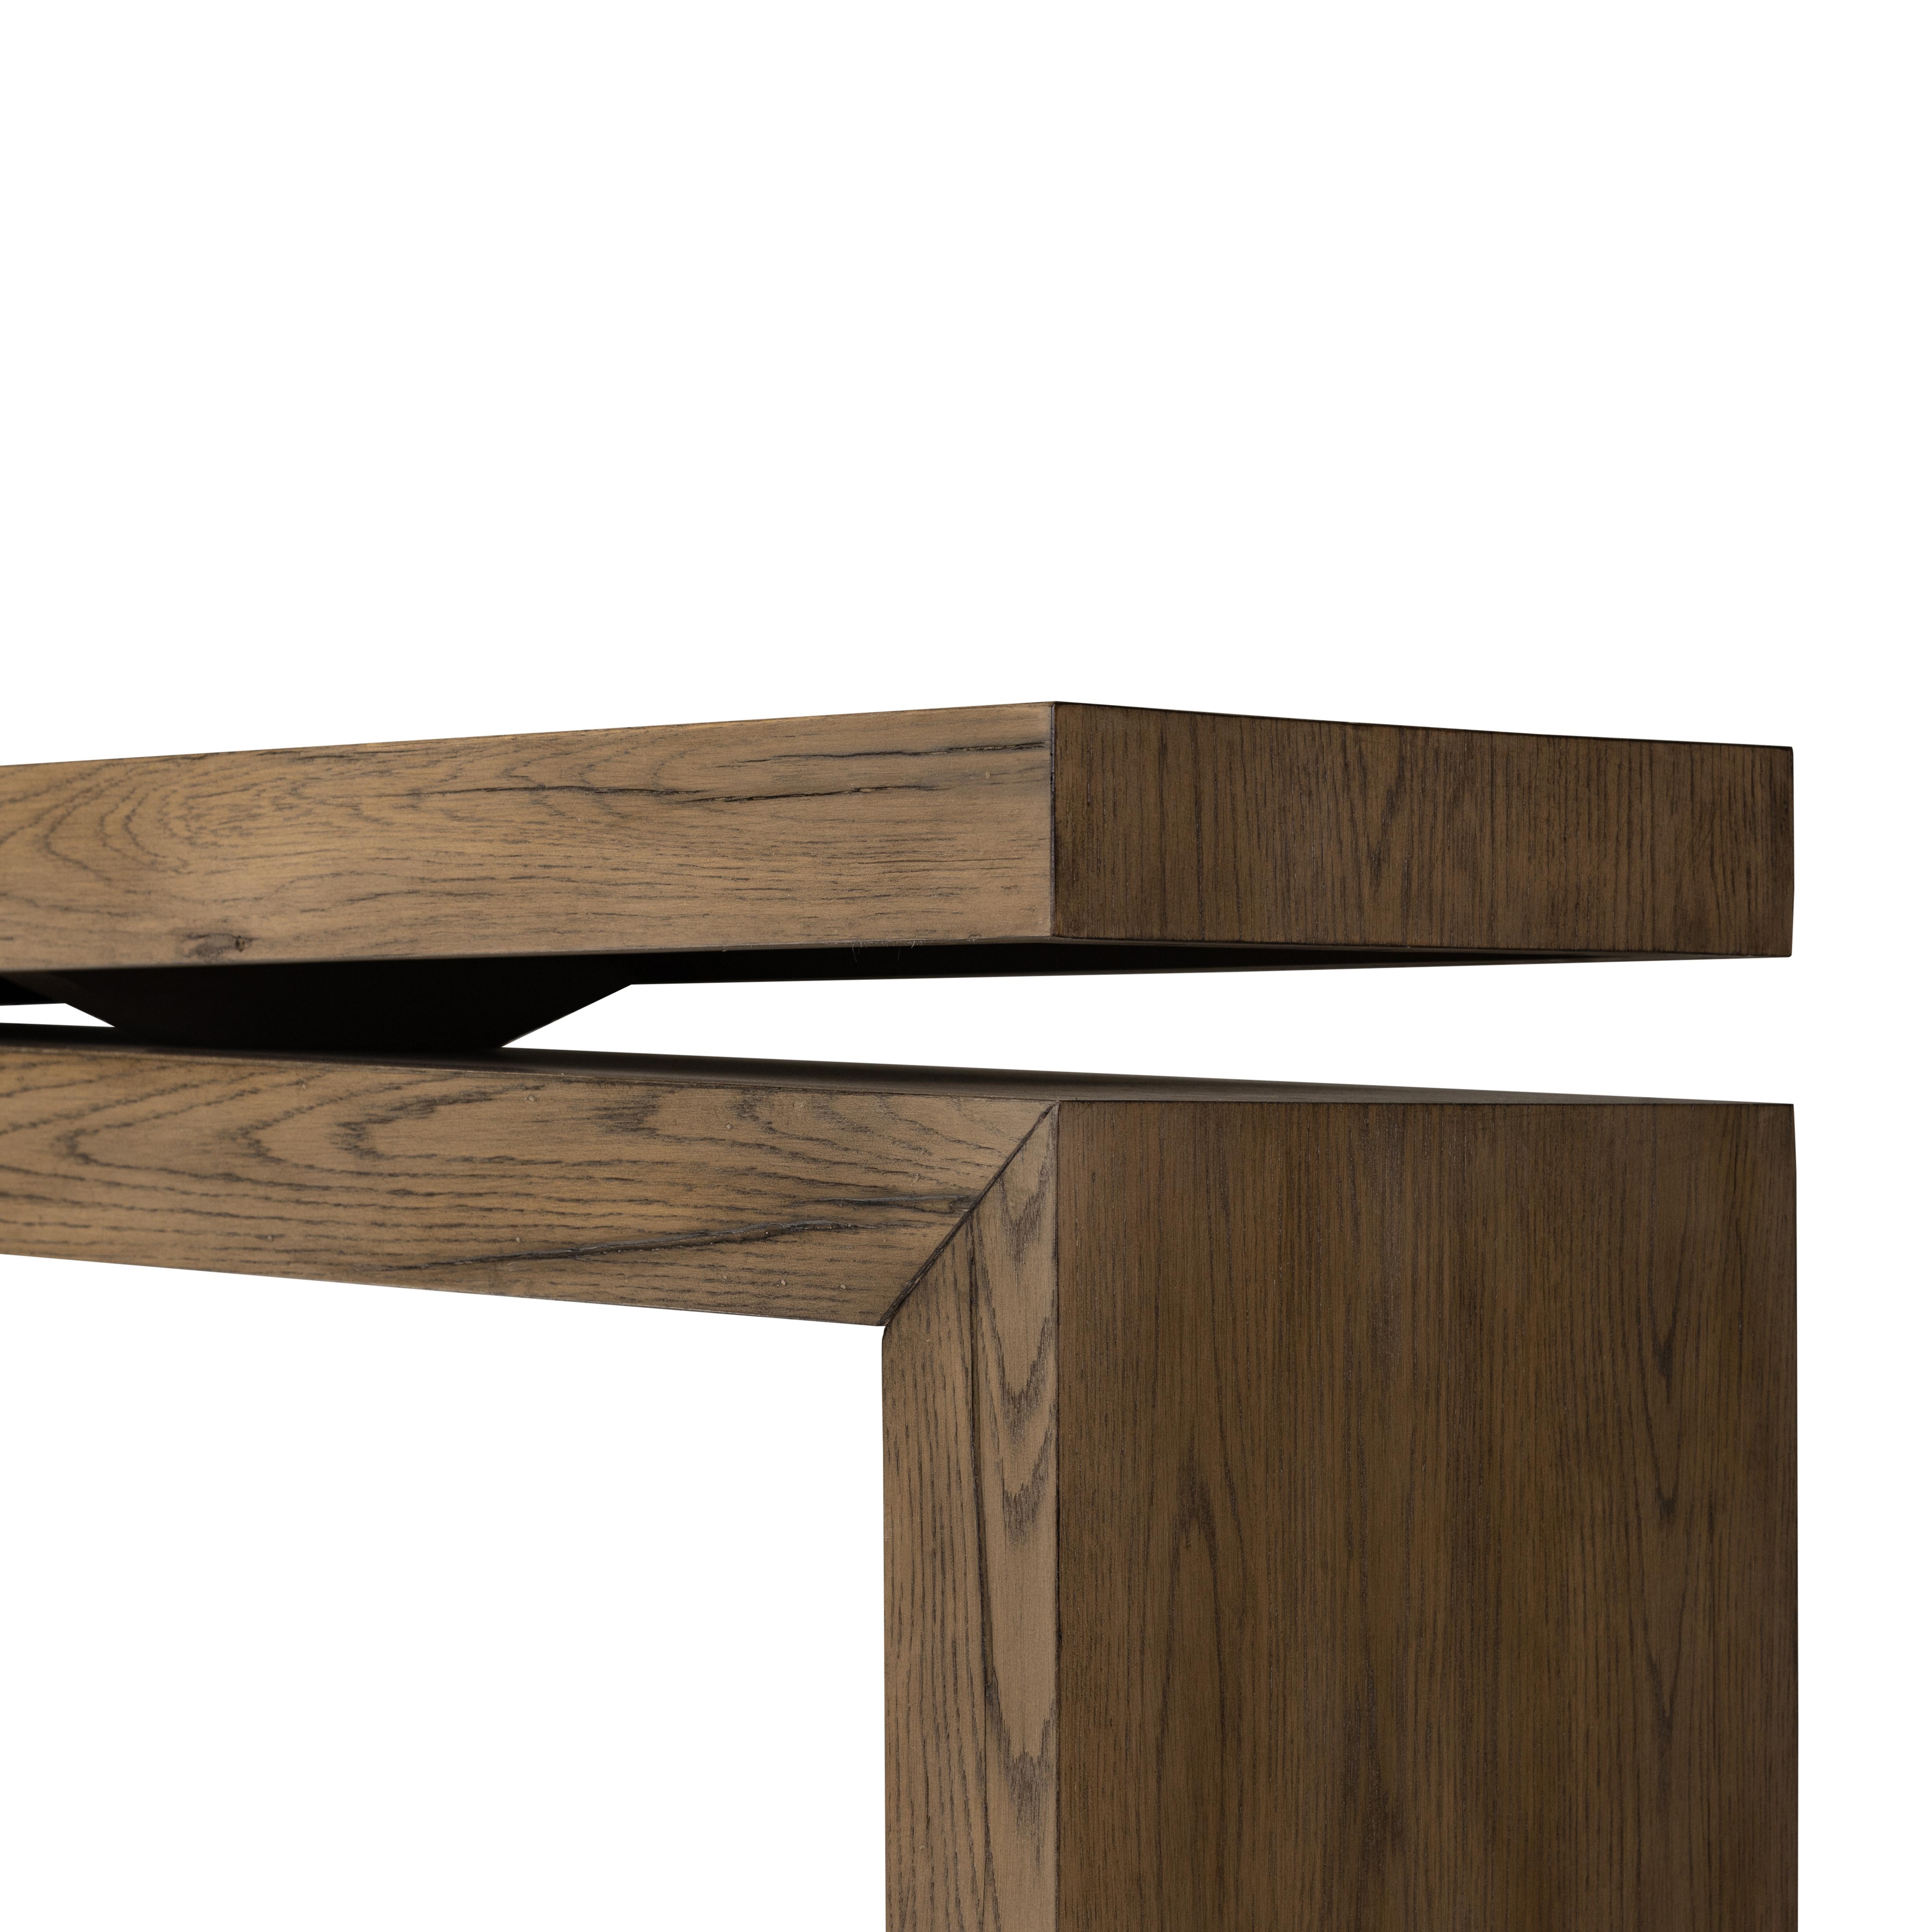 Matthes Console Table-Rustic Natural - Image 6